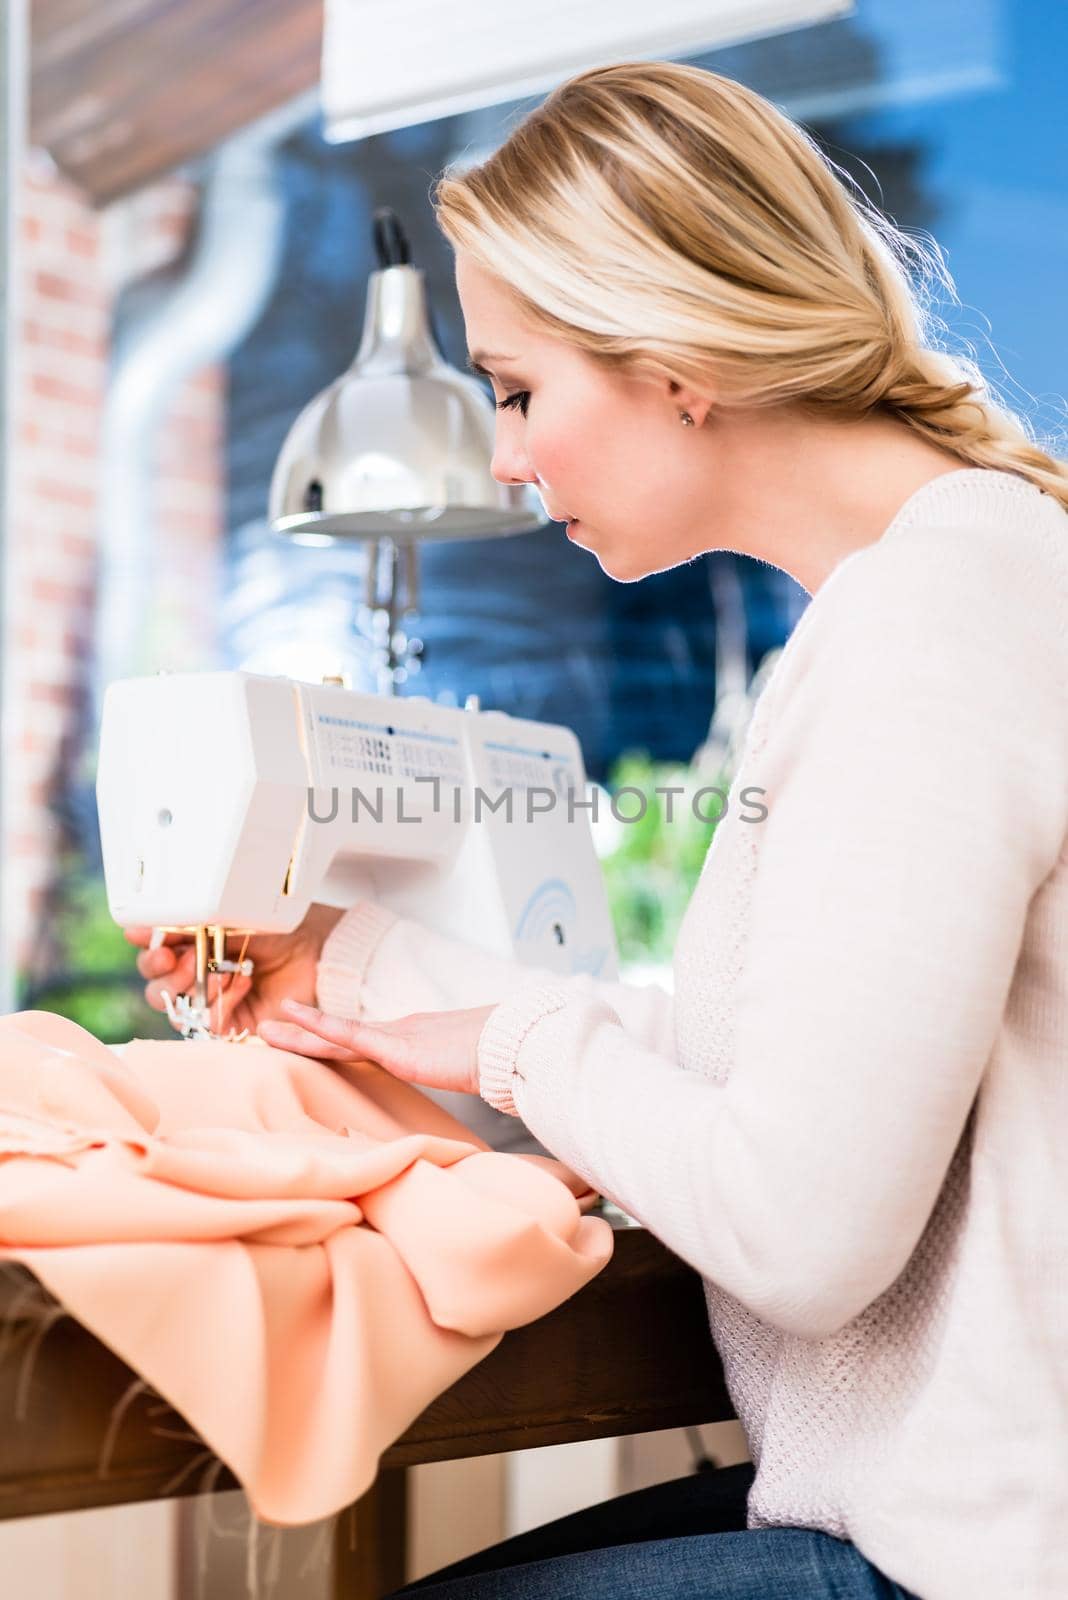 Portrait of a woman stitching clothes on electric sewing machine